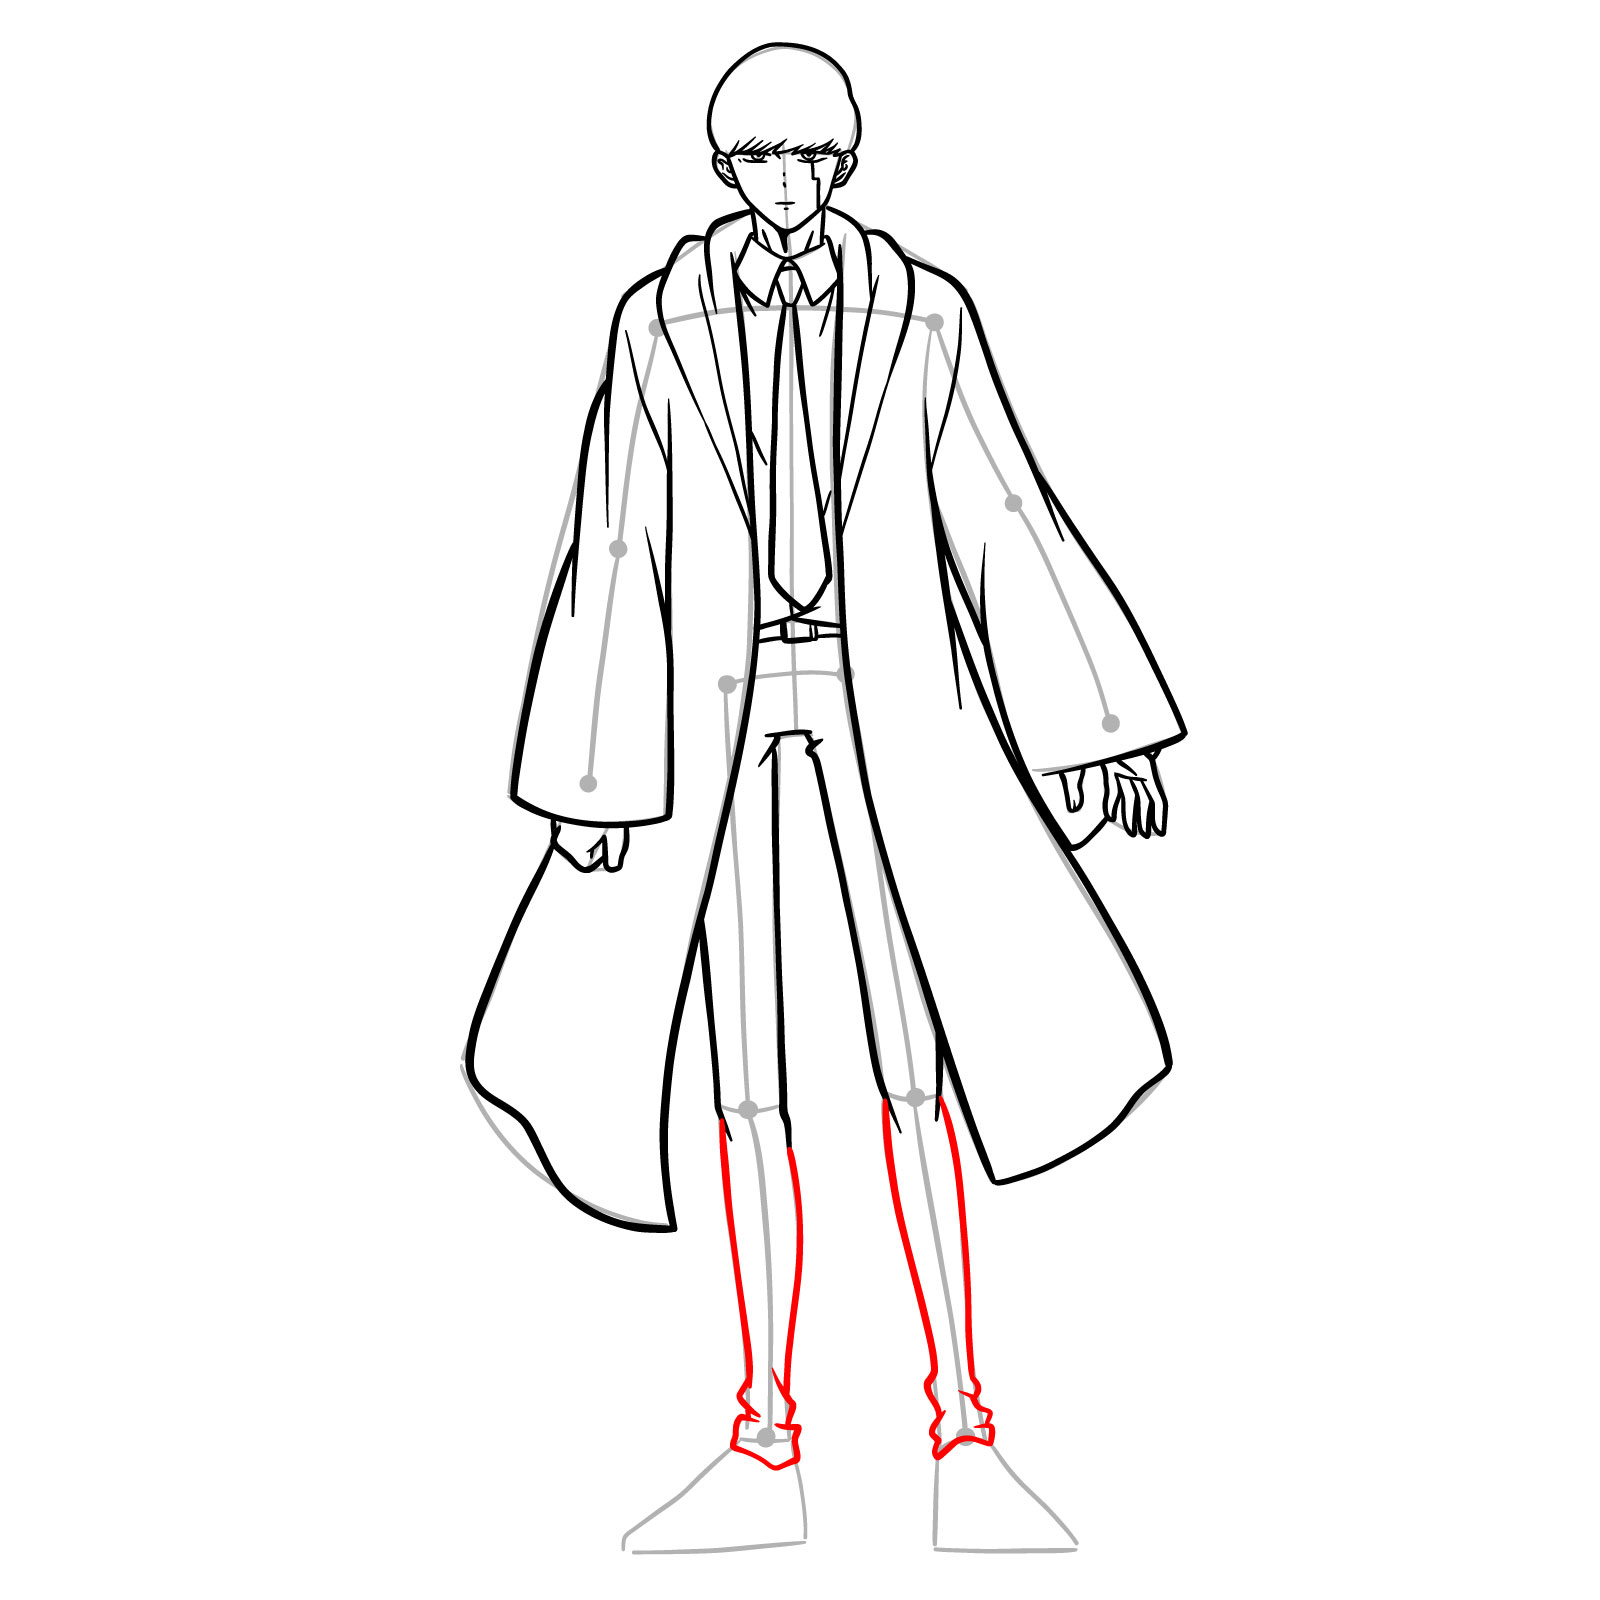 Completing Mash's full body drawing with the lower legs and pants - step 16